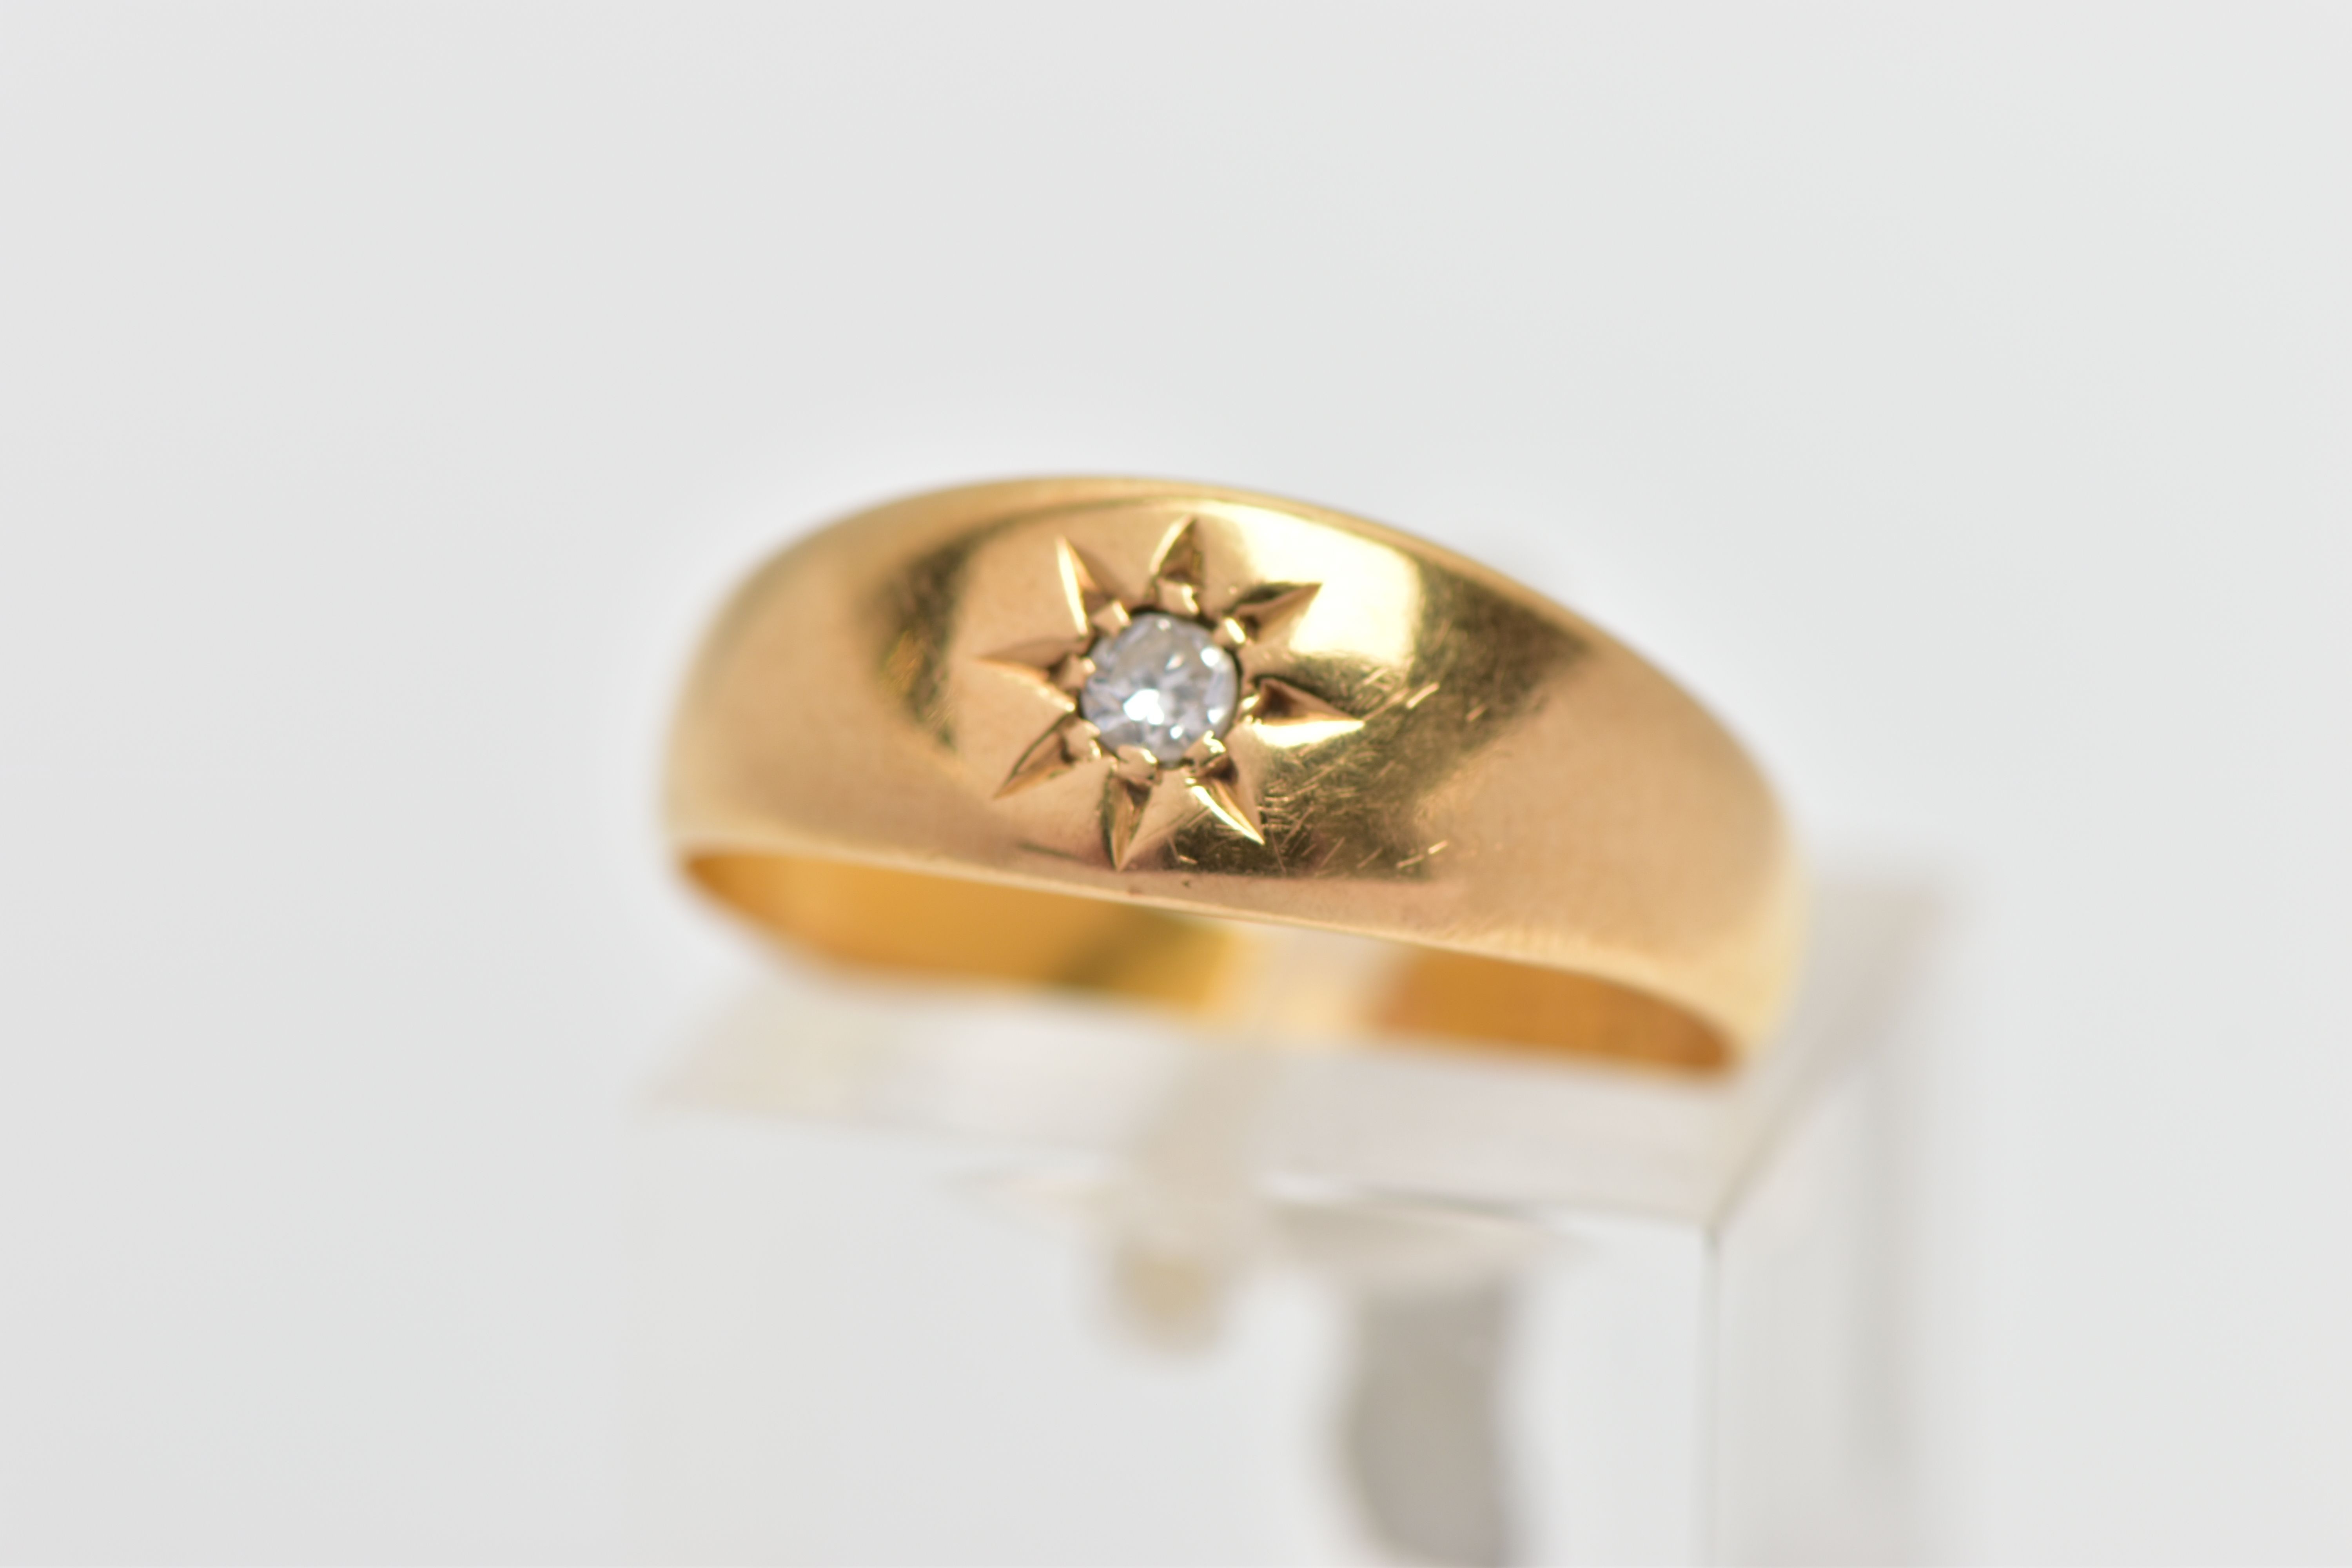 AN EARLY 20TH CENTURY 1920'S 22CT YELLOW GOLD DIAMOND SINGLE STONE RING, set with a single cut